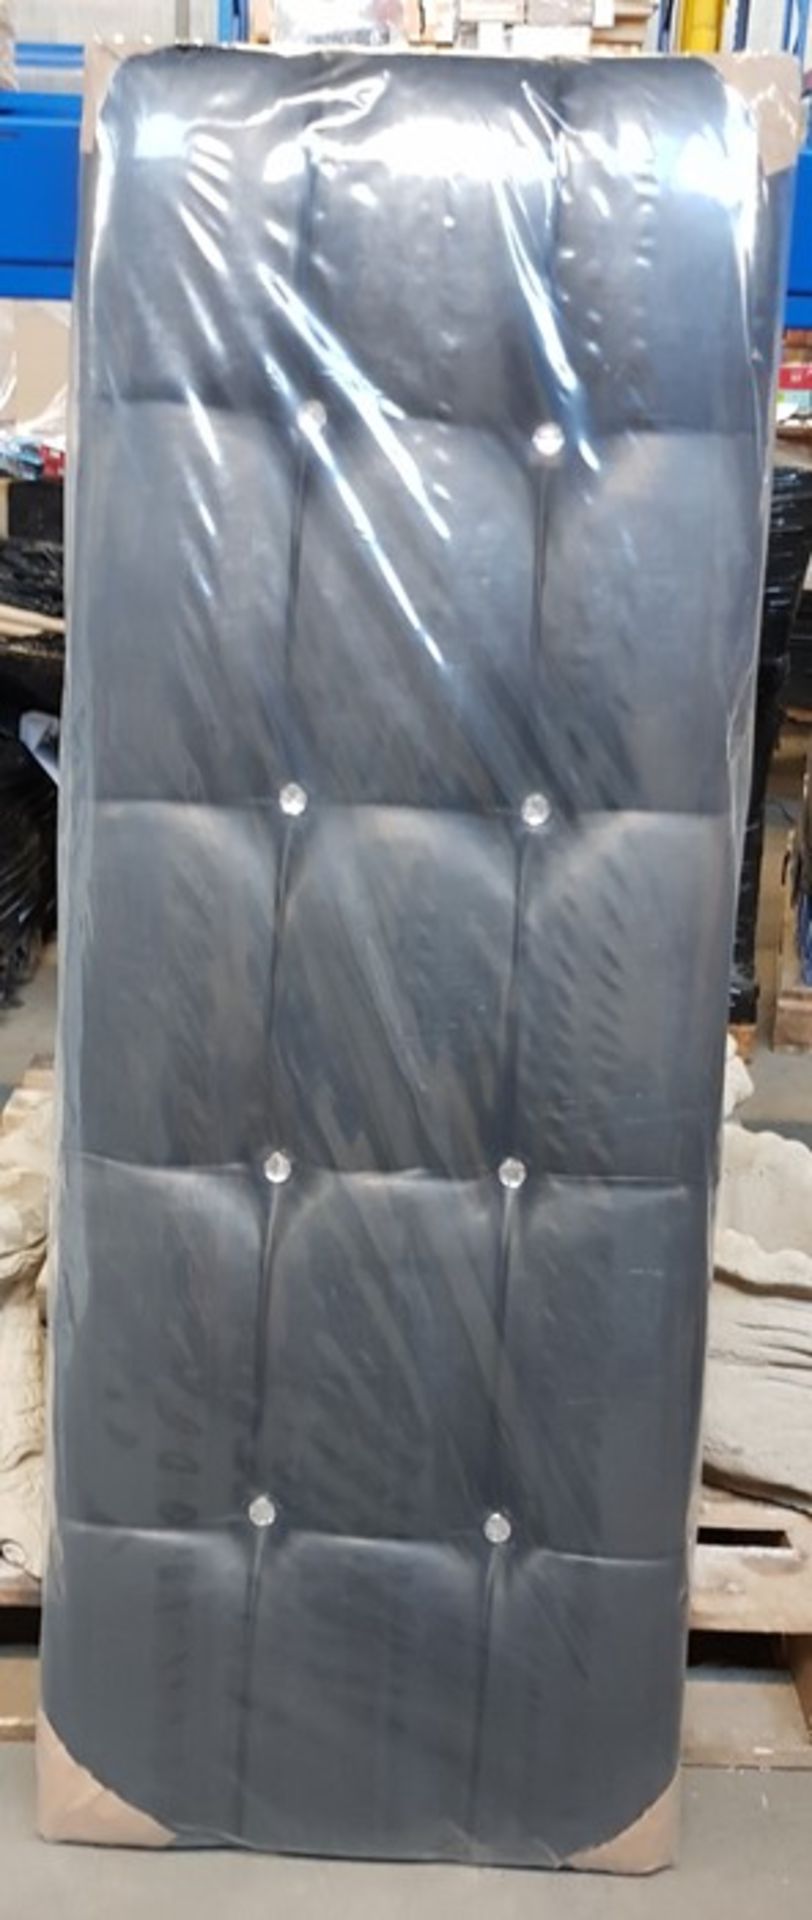 1 BAGGED 135CM DOUBLE HEADBOARD IN BLACK / RRP £98.00 (PUBLIC VIEWING AVAILABLE)